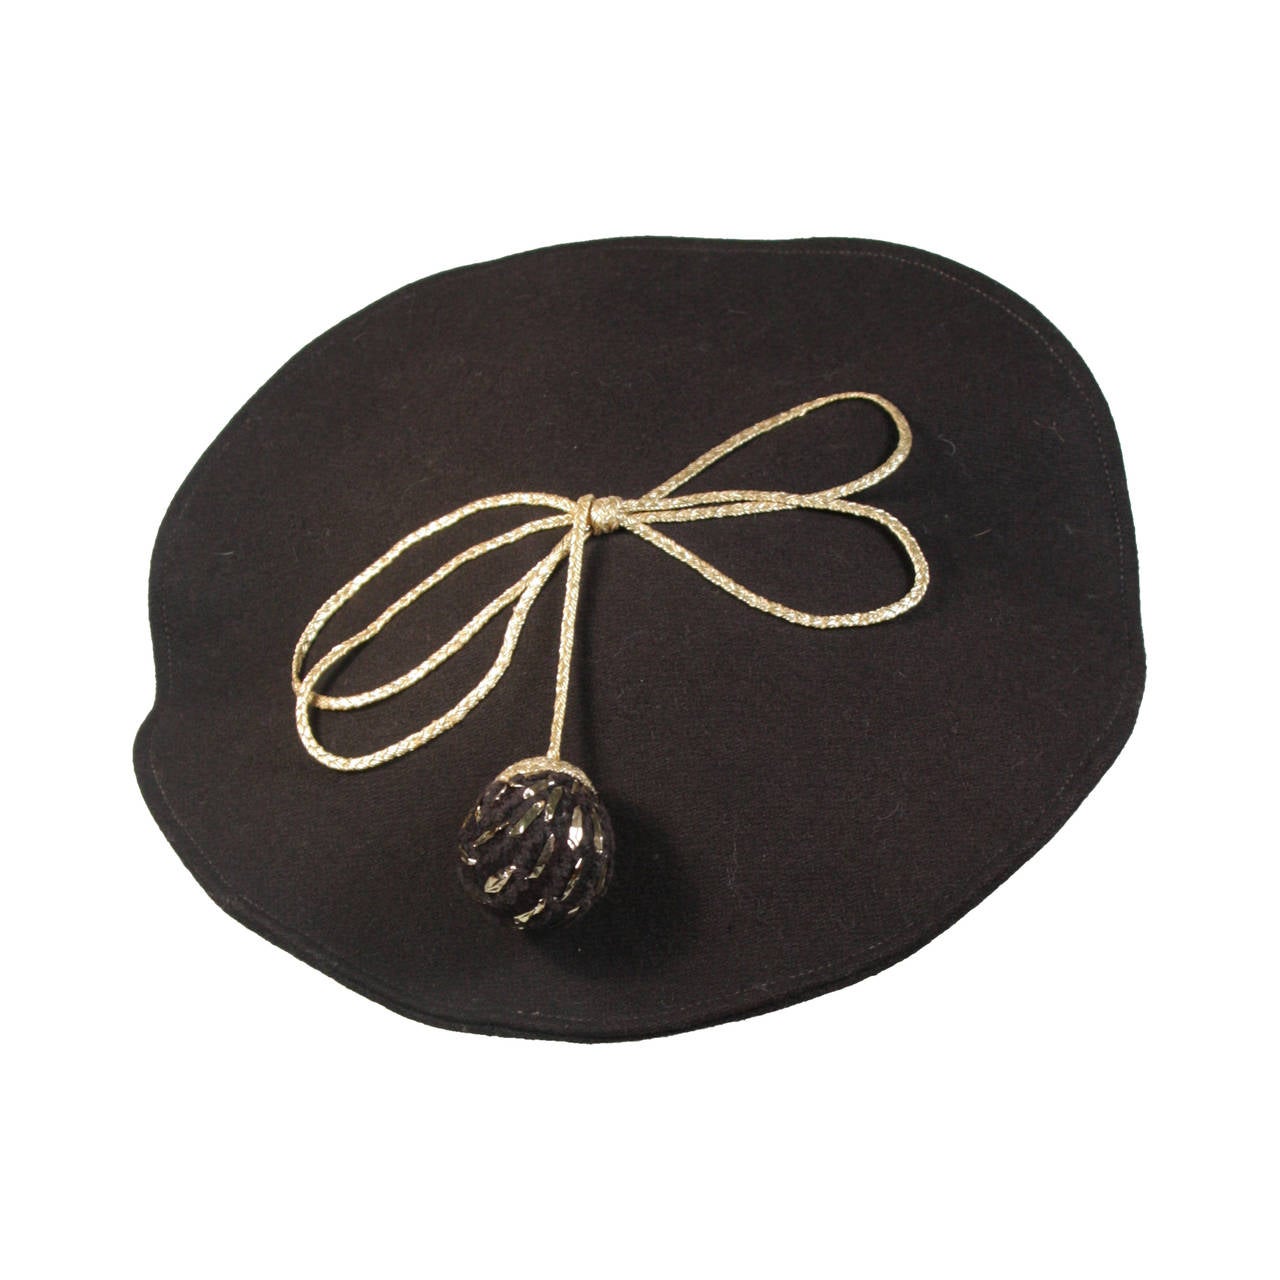 Yves Saint Laurent Rive Gauche Black Beret with Knit Ball For Sale